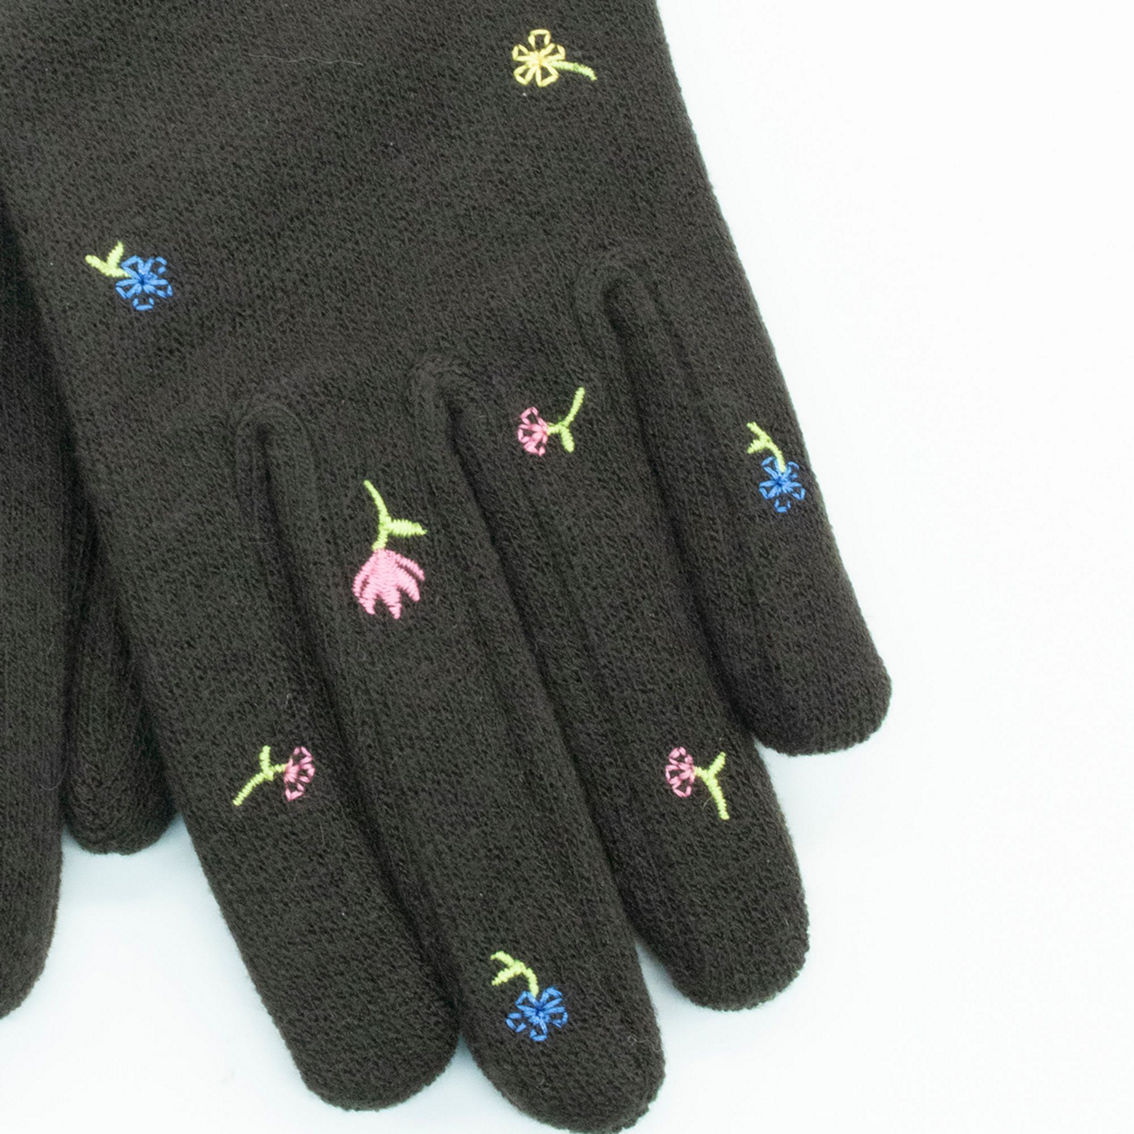 Portolano gloves with embroidered flowers - Image 2 of 2